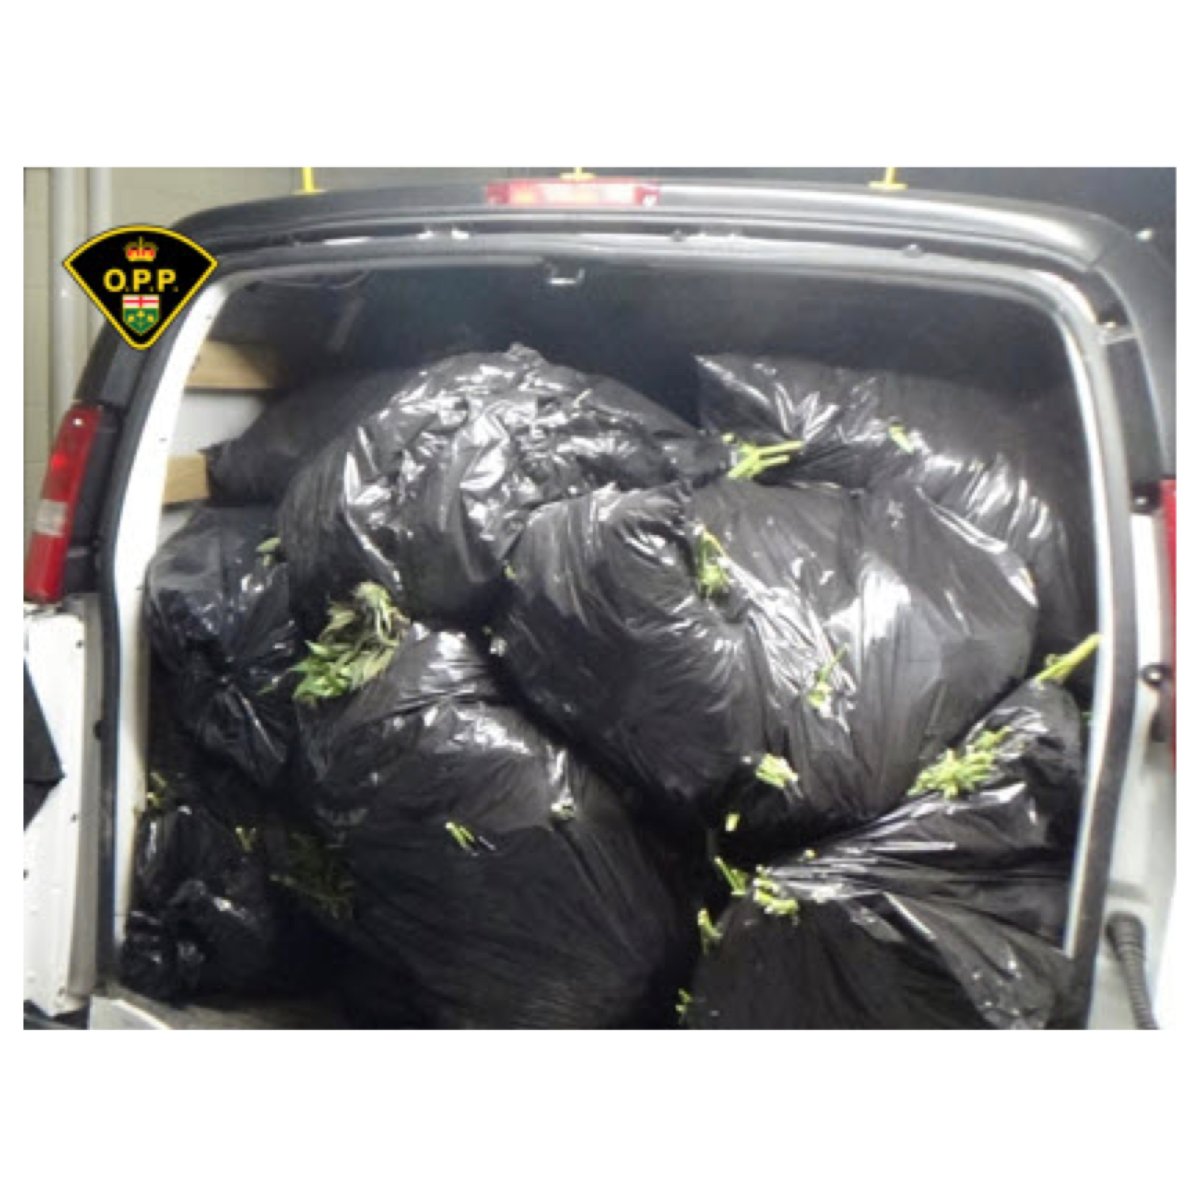 Cannabis seized by OPP in Quinte West.